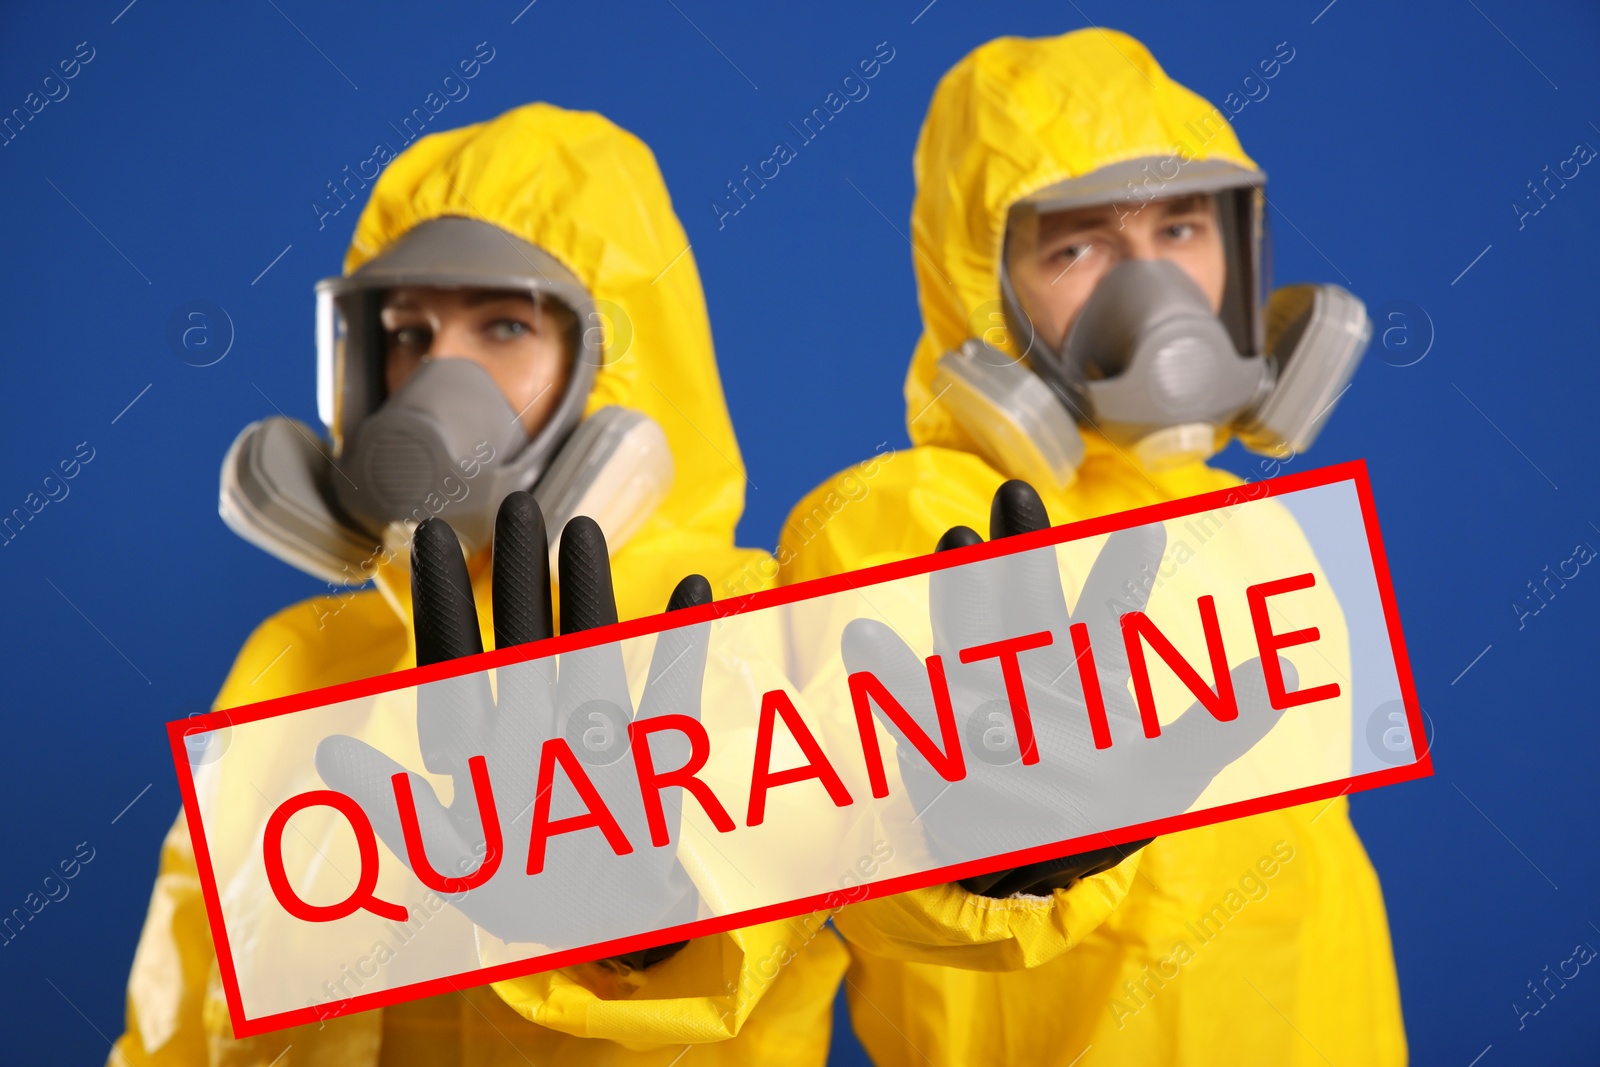 Image of Quarantine during coronavirus outbreak. Man and woman in chemical protective suits making stop gesture against blue background